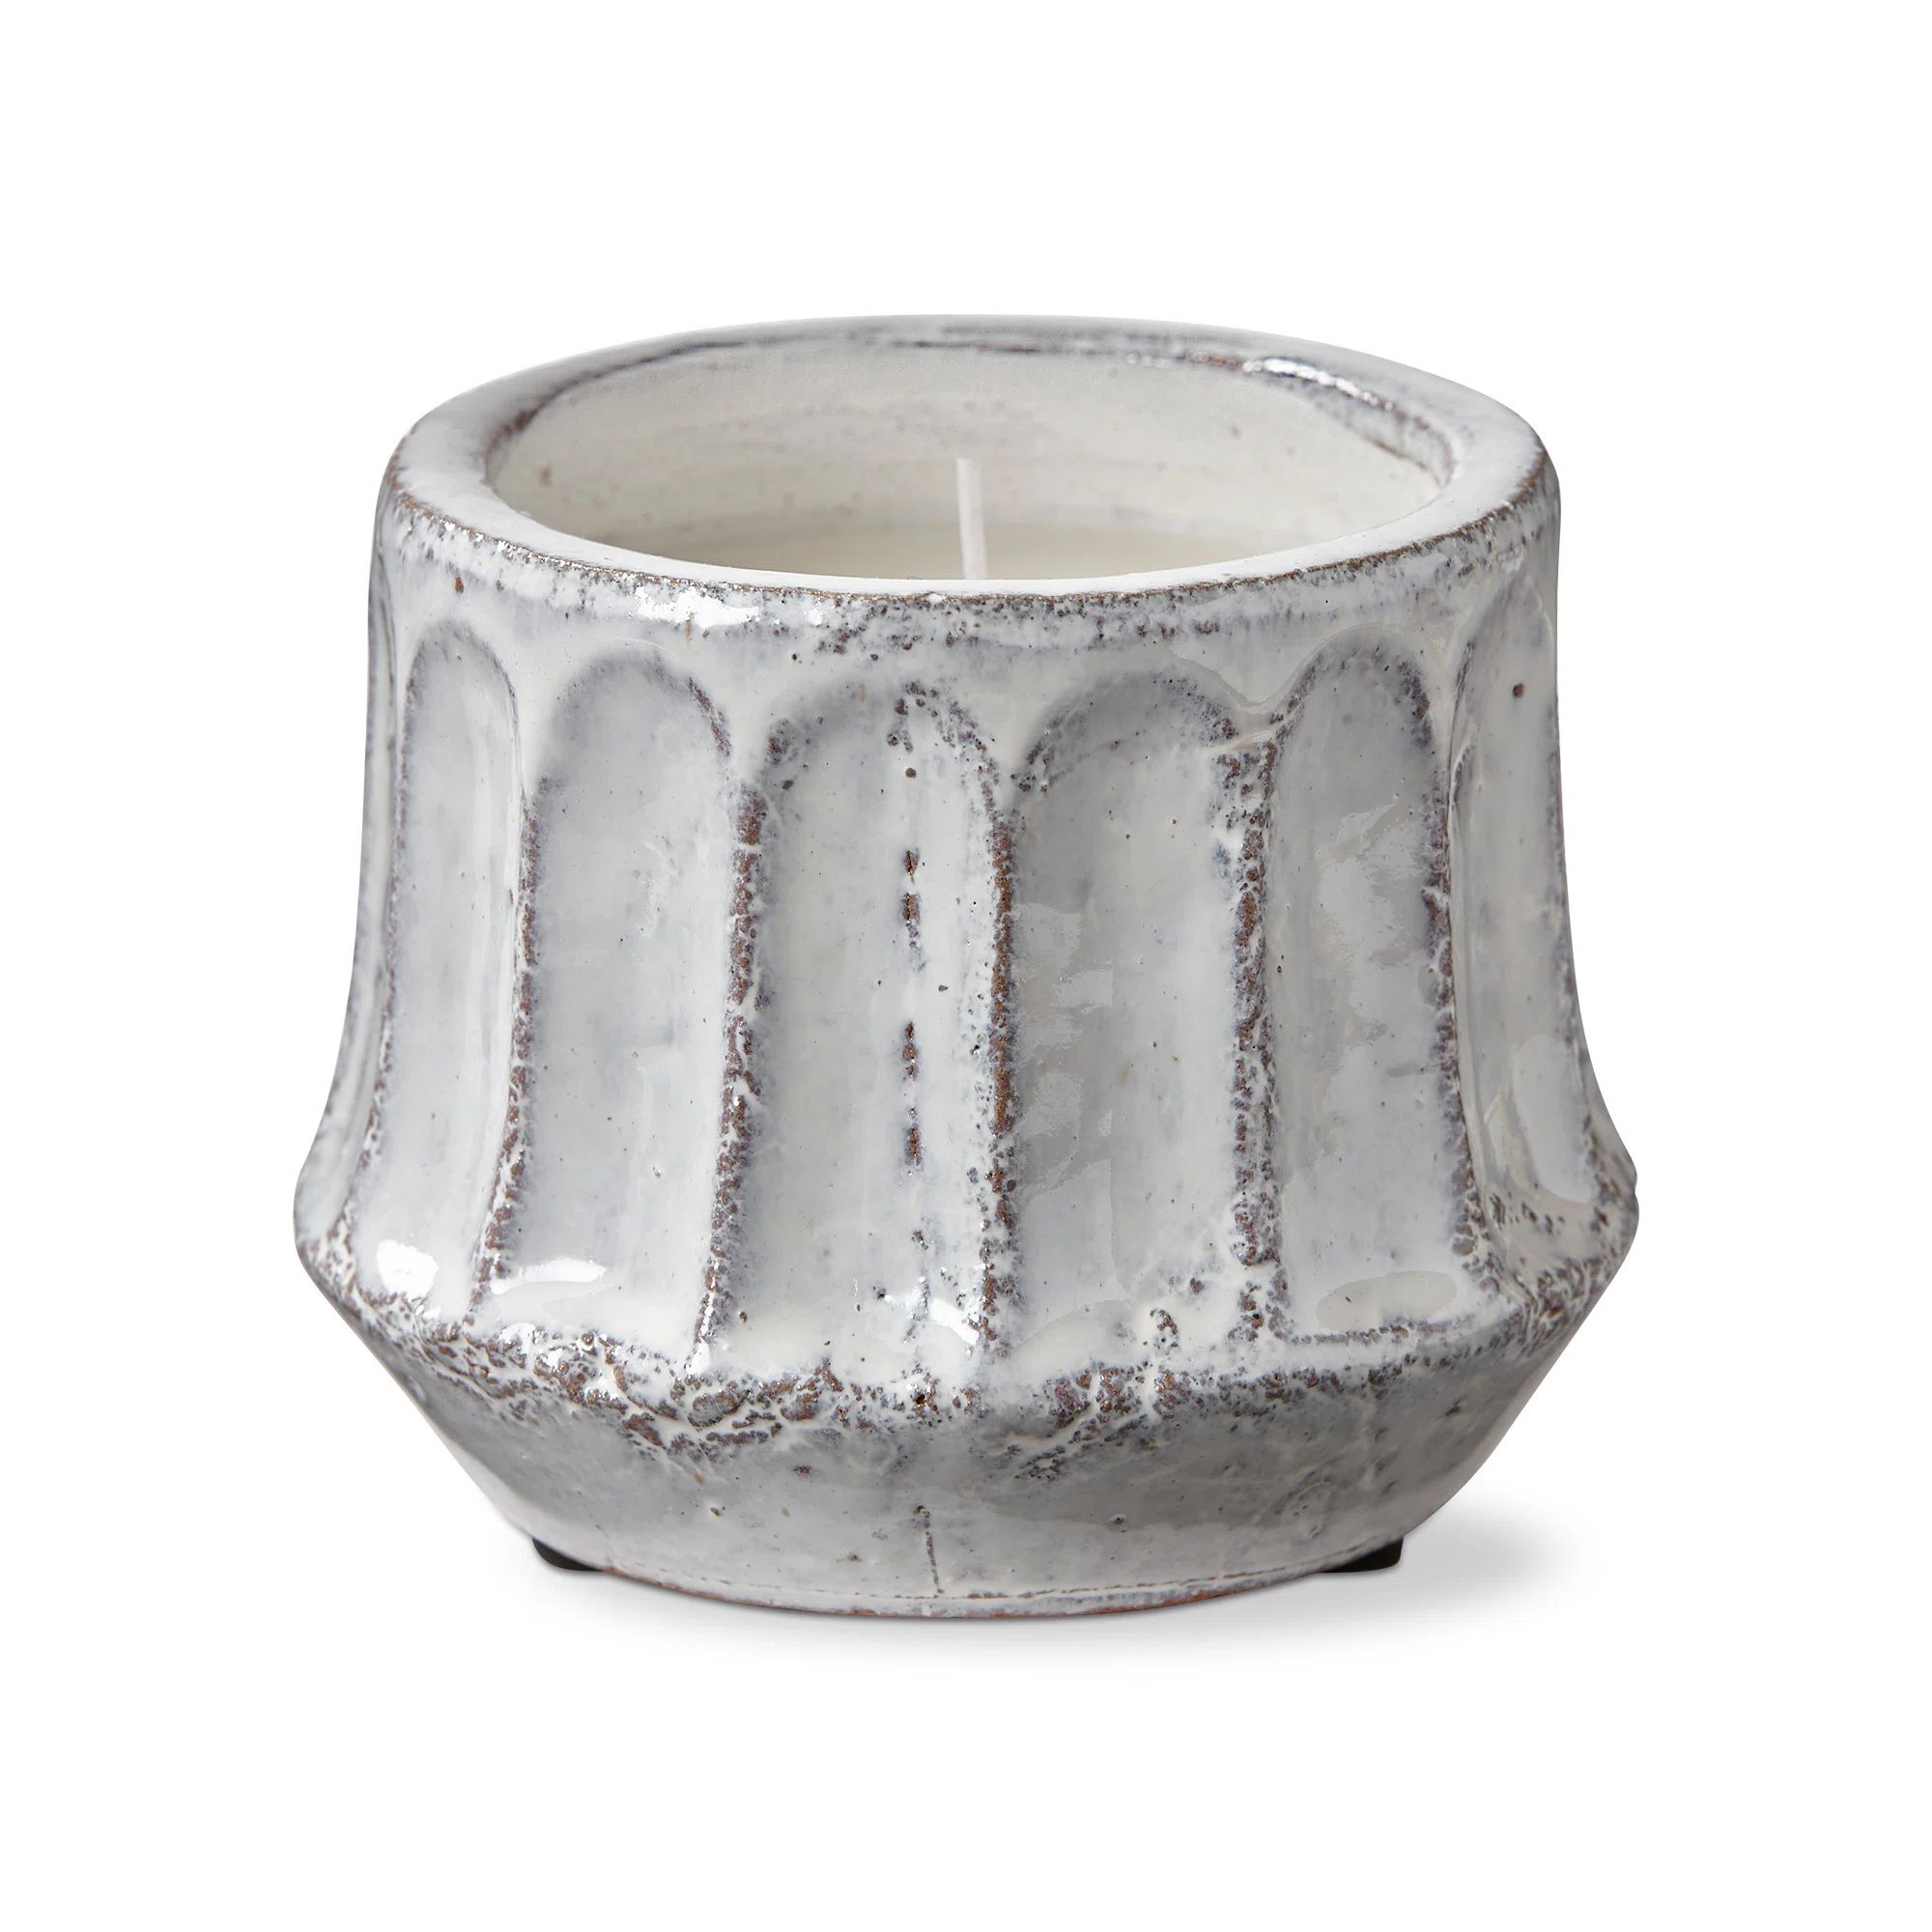 TAG Citronella Scented Novelty Candle with Tin Holder | Wayfair | Wayfair North America